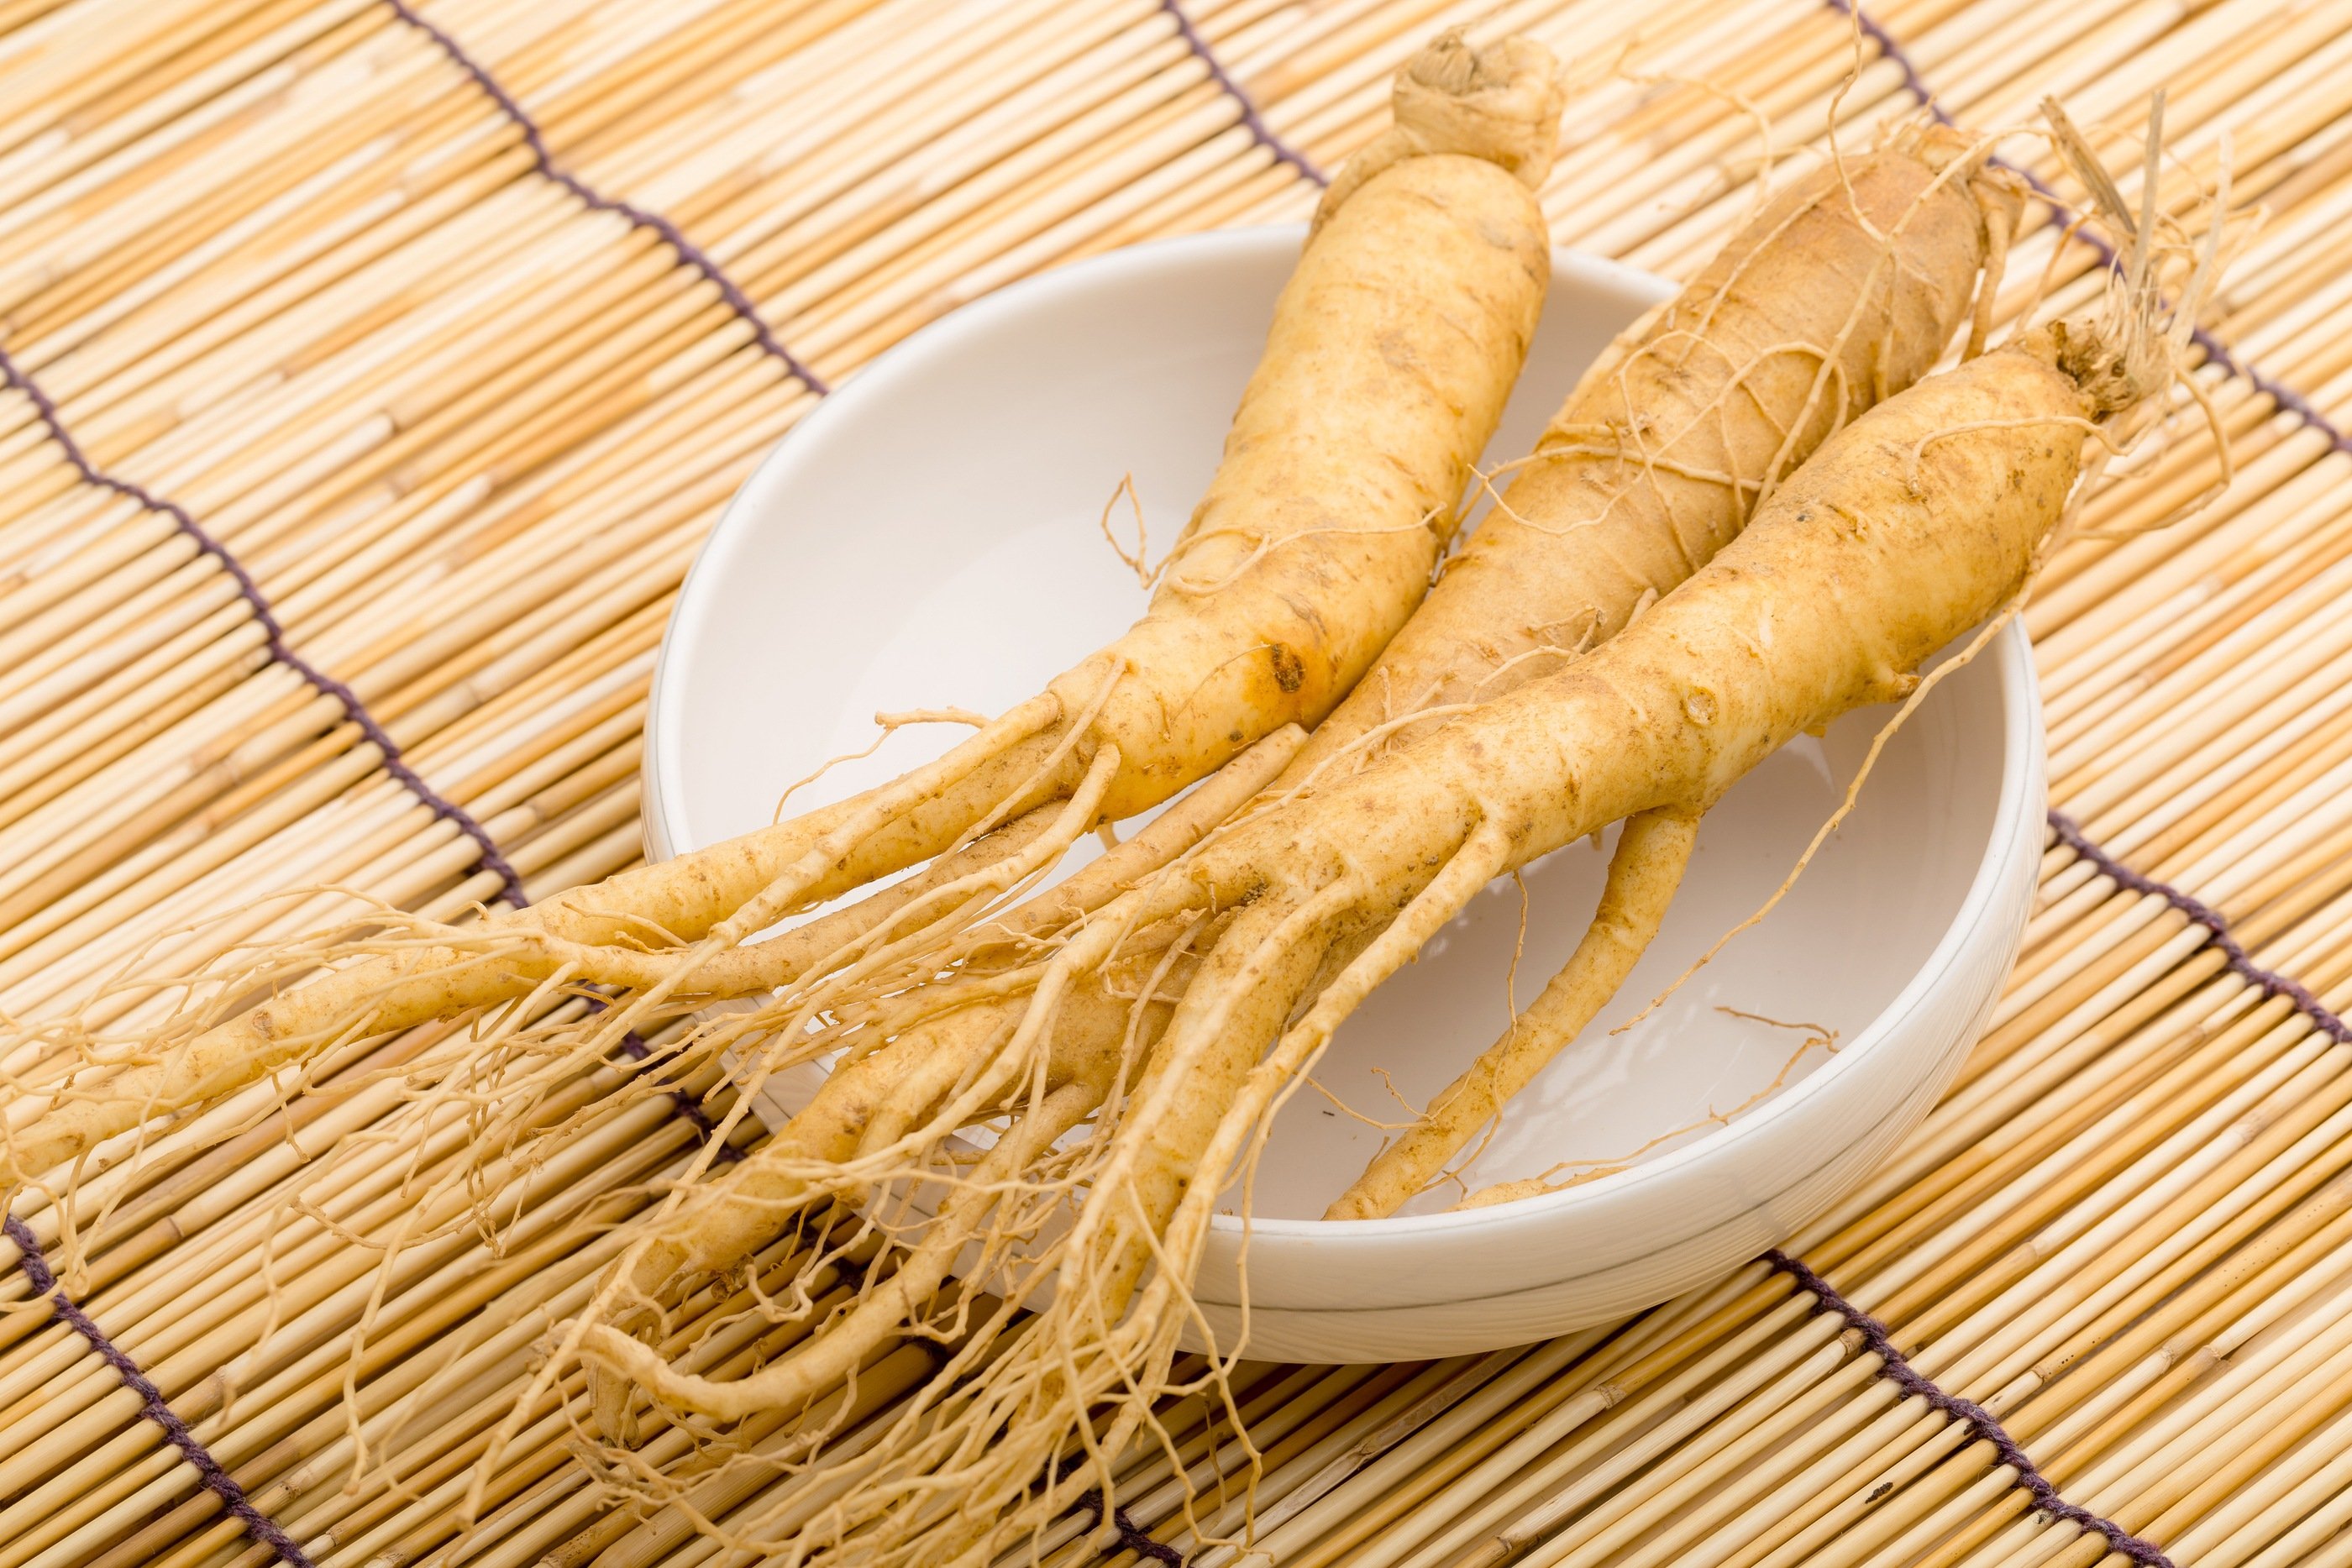 10 Benefits Of Ginseng That You Need To Know - Lifehack